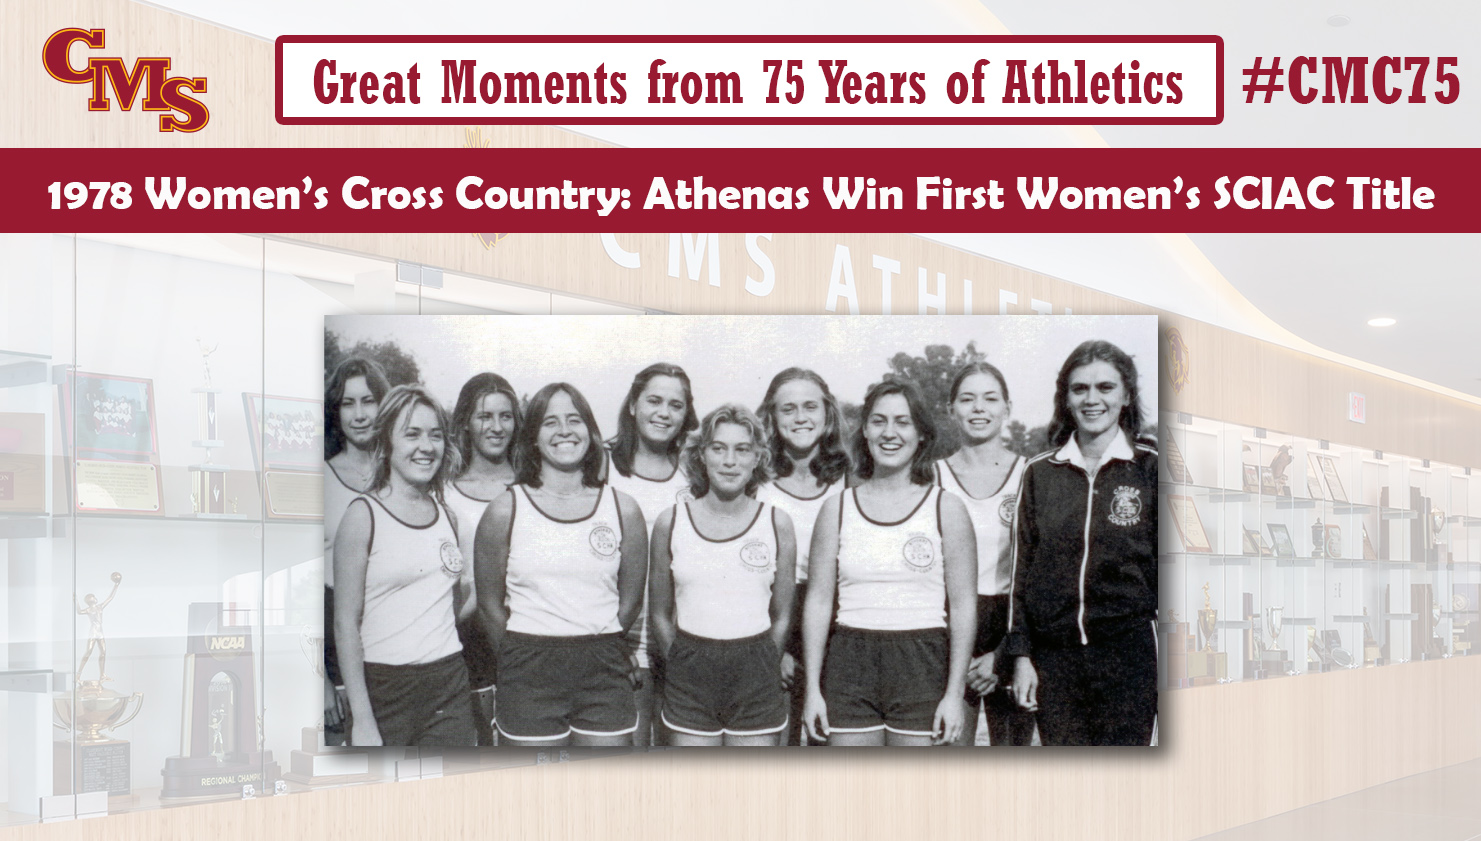 A team photo of the 1978 women's cross country team, overlayed in front of an image of the CMS trophy case. The text reads 75 Great Moments from 75 Years: 1978 Women's Cross Country: Athenas Win First Women's SCIAC Title and has the hashtag #CMC75